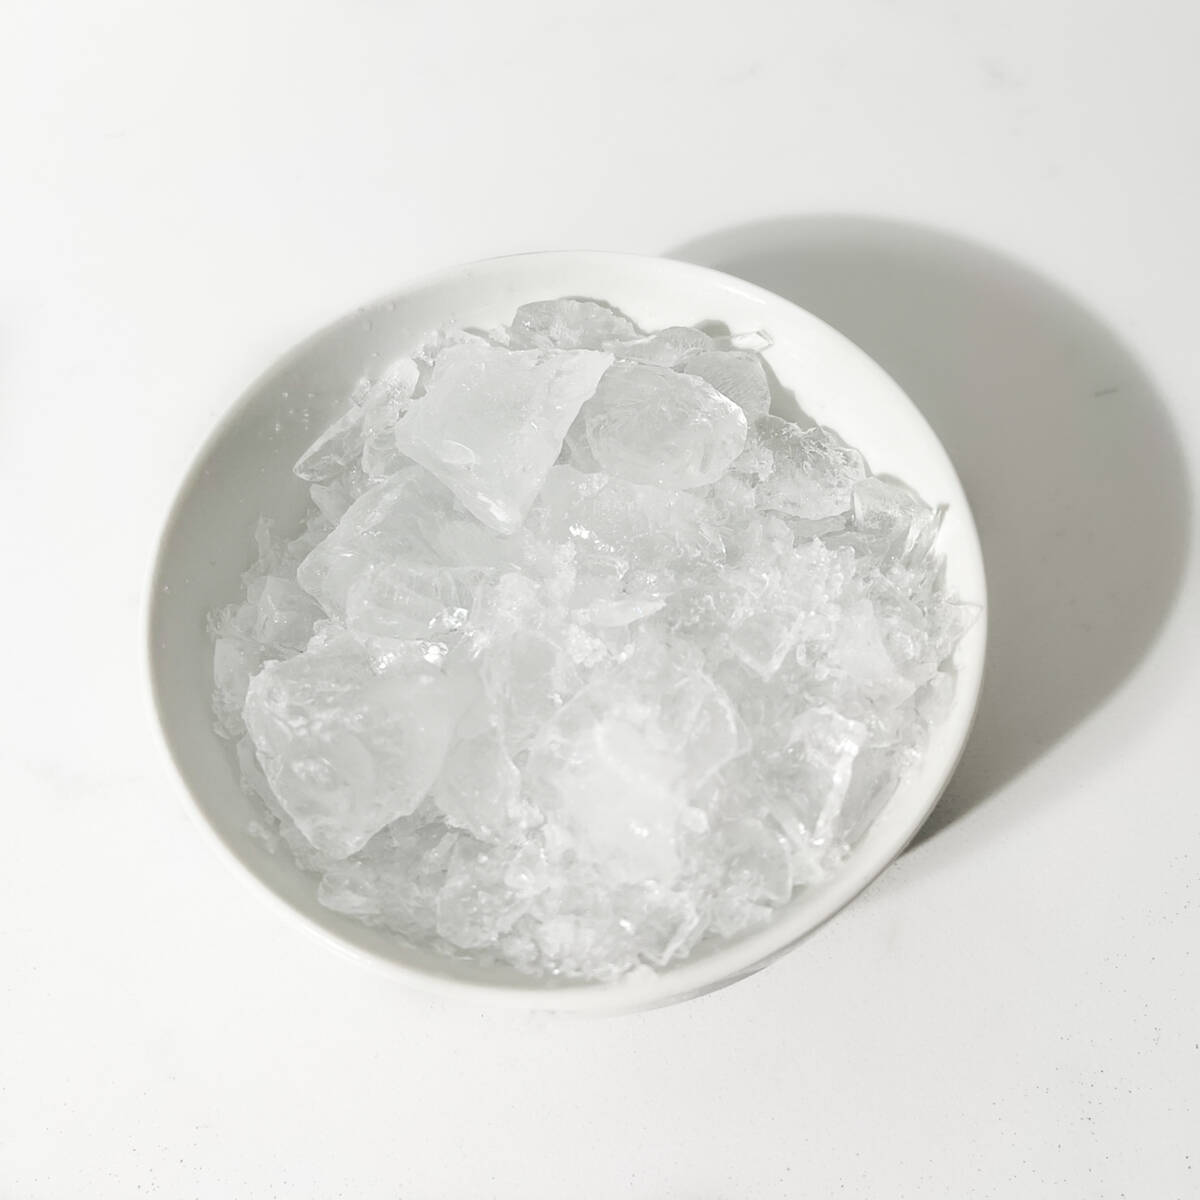 Bashed ice in a small bowl.